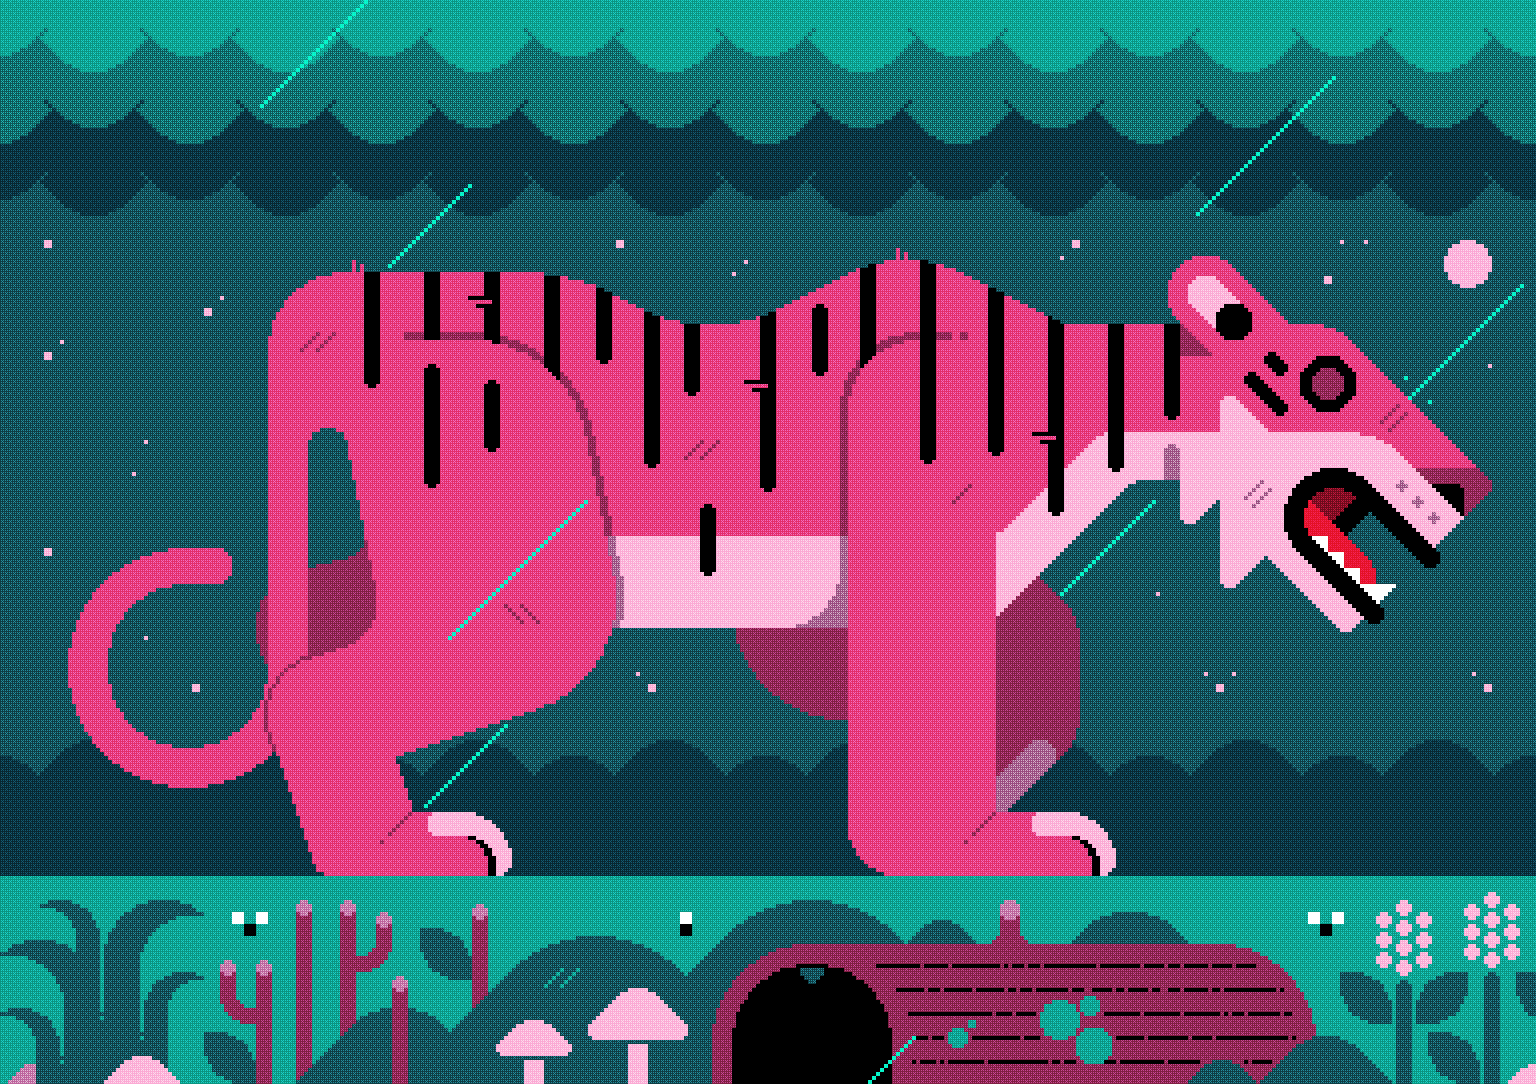 a hot pink tiger prowls in an animated jungle, with stormy rainclouds above and spooky forest flora on the ground beneath them..